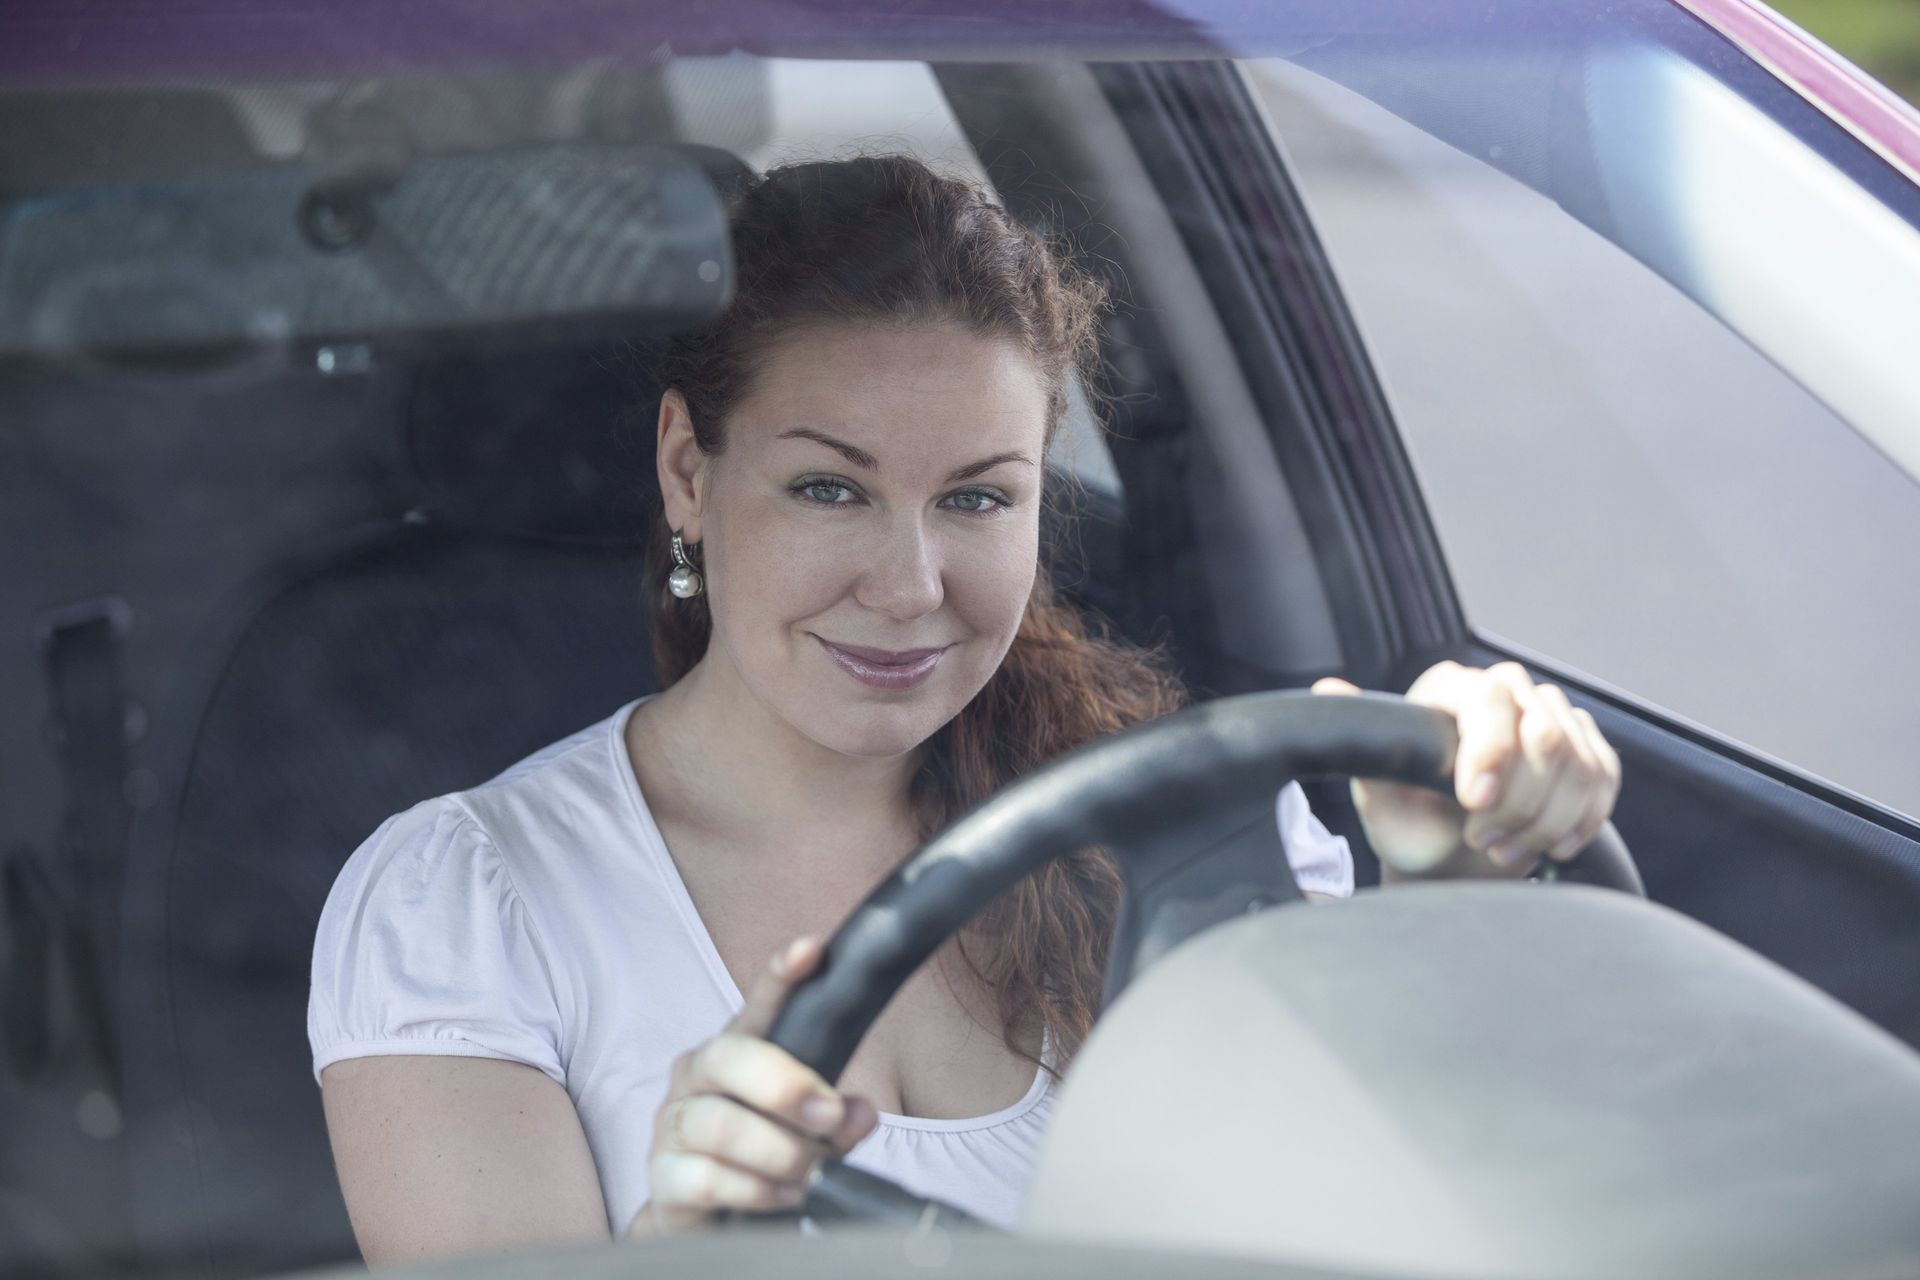 Driving school, cheap and friendly, with female driving instructors